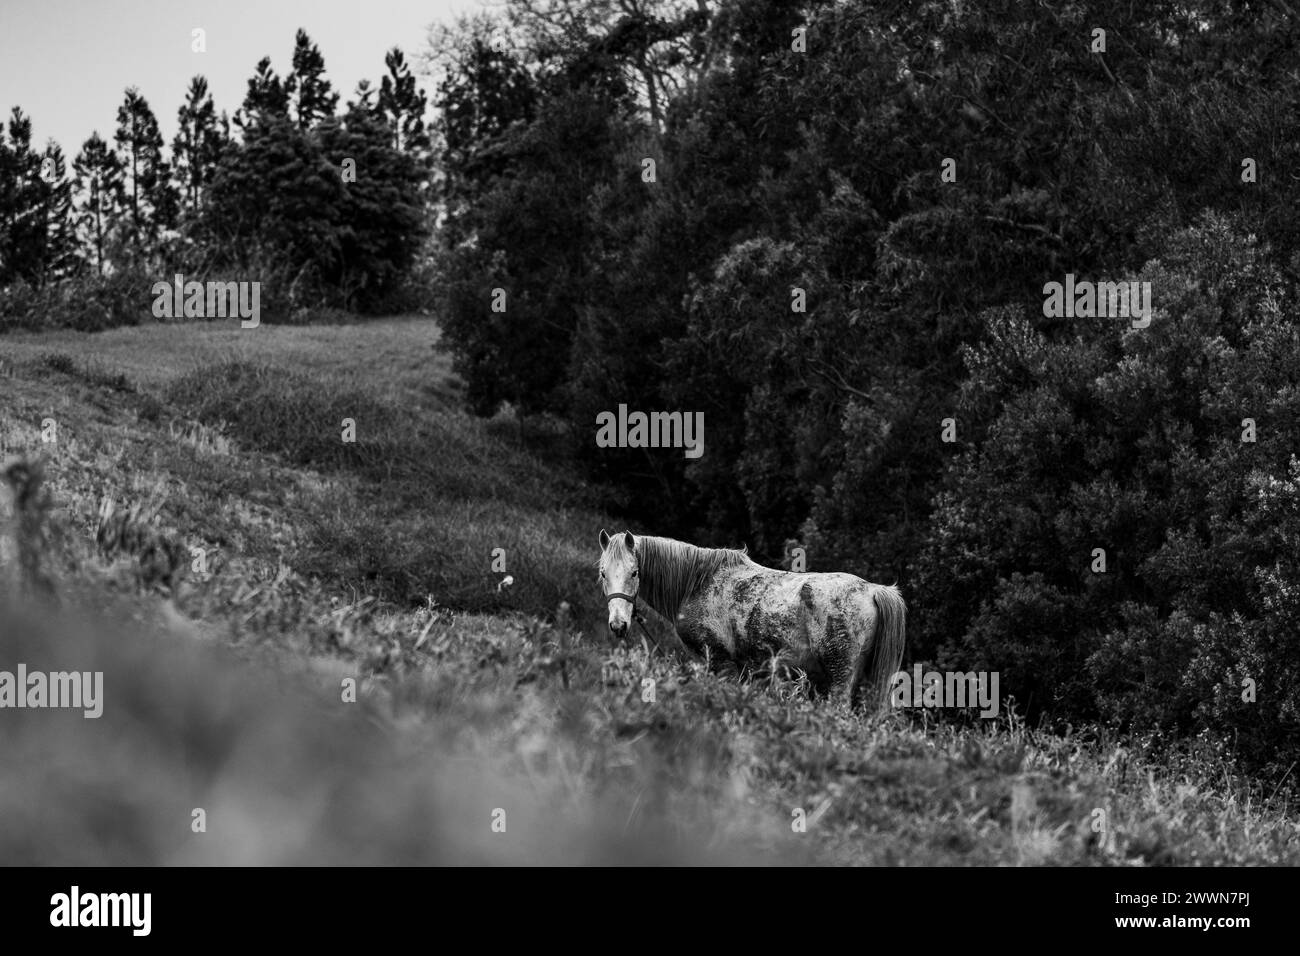 Traveling at Azores islands, farm animals in nature, surrounded by amazing landscapes. Stock Photo